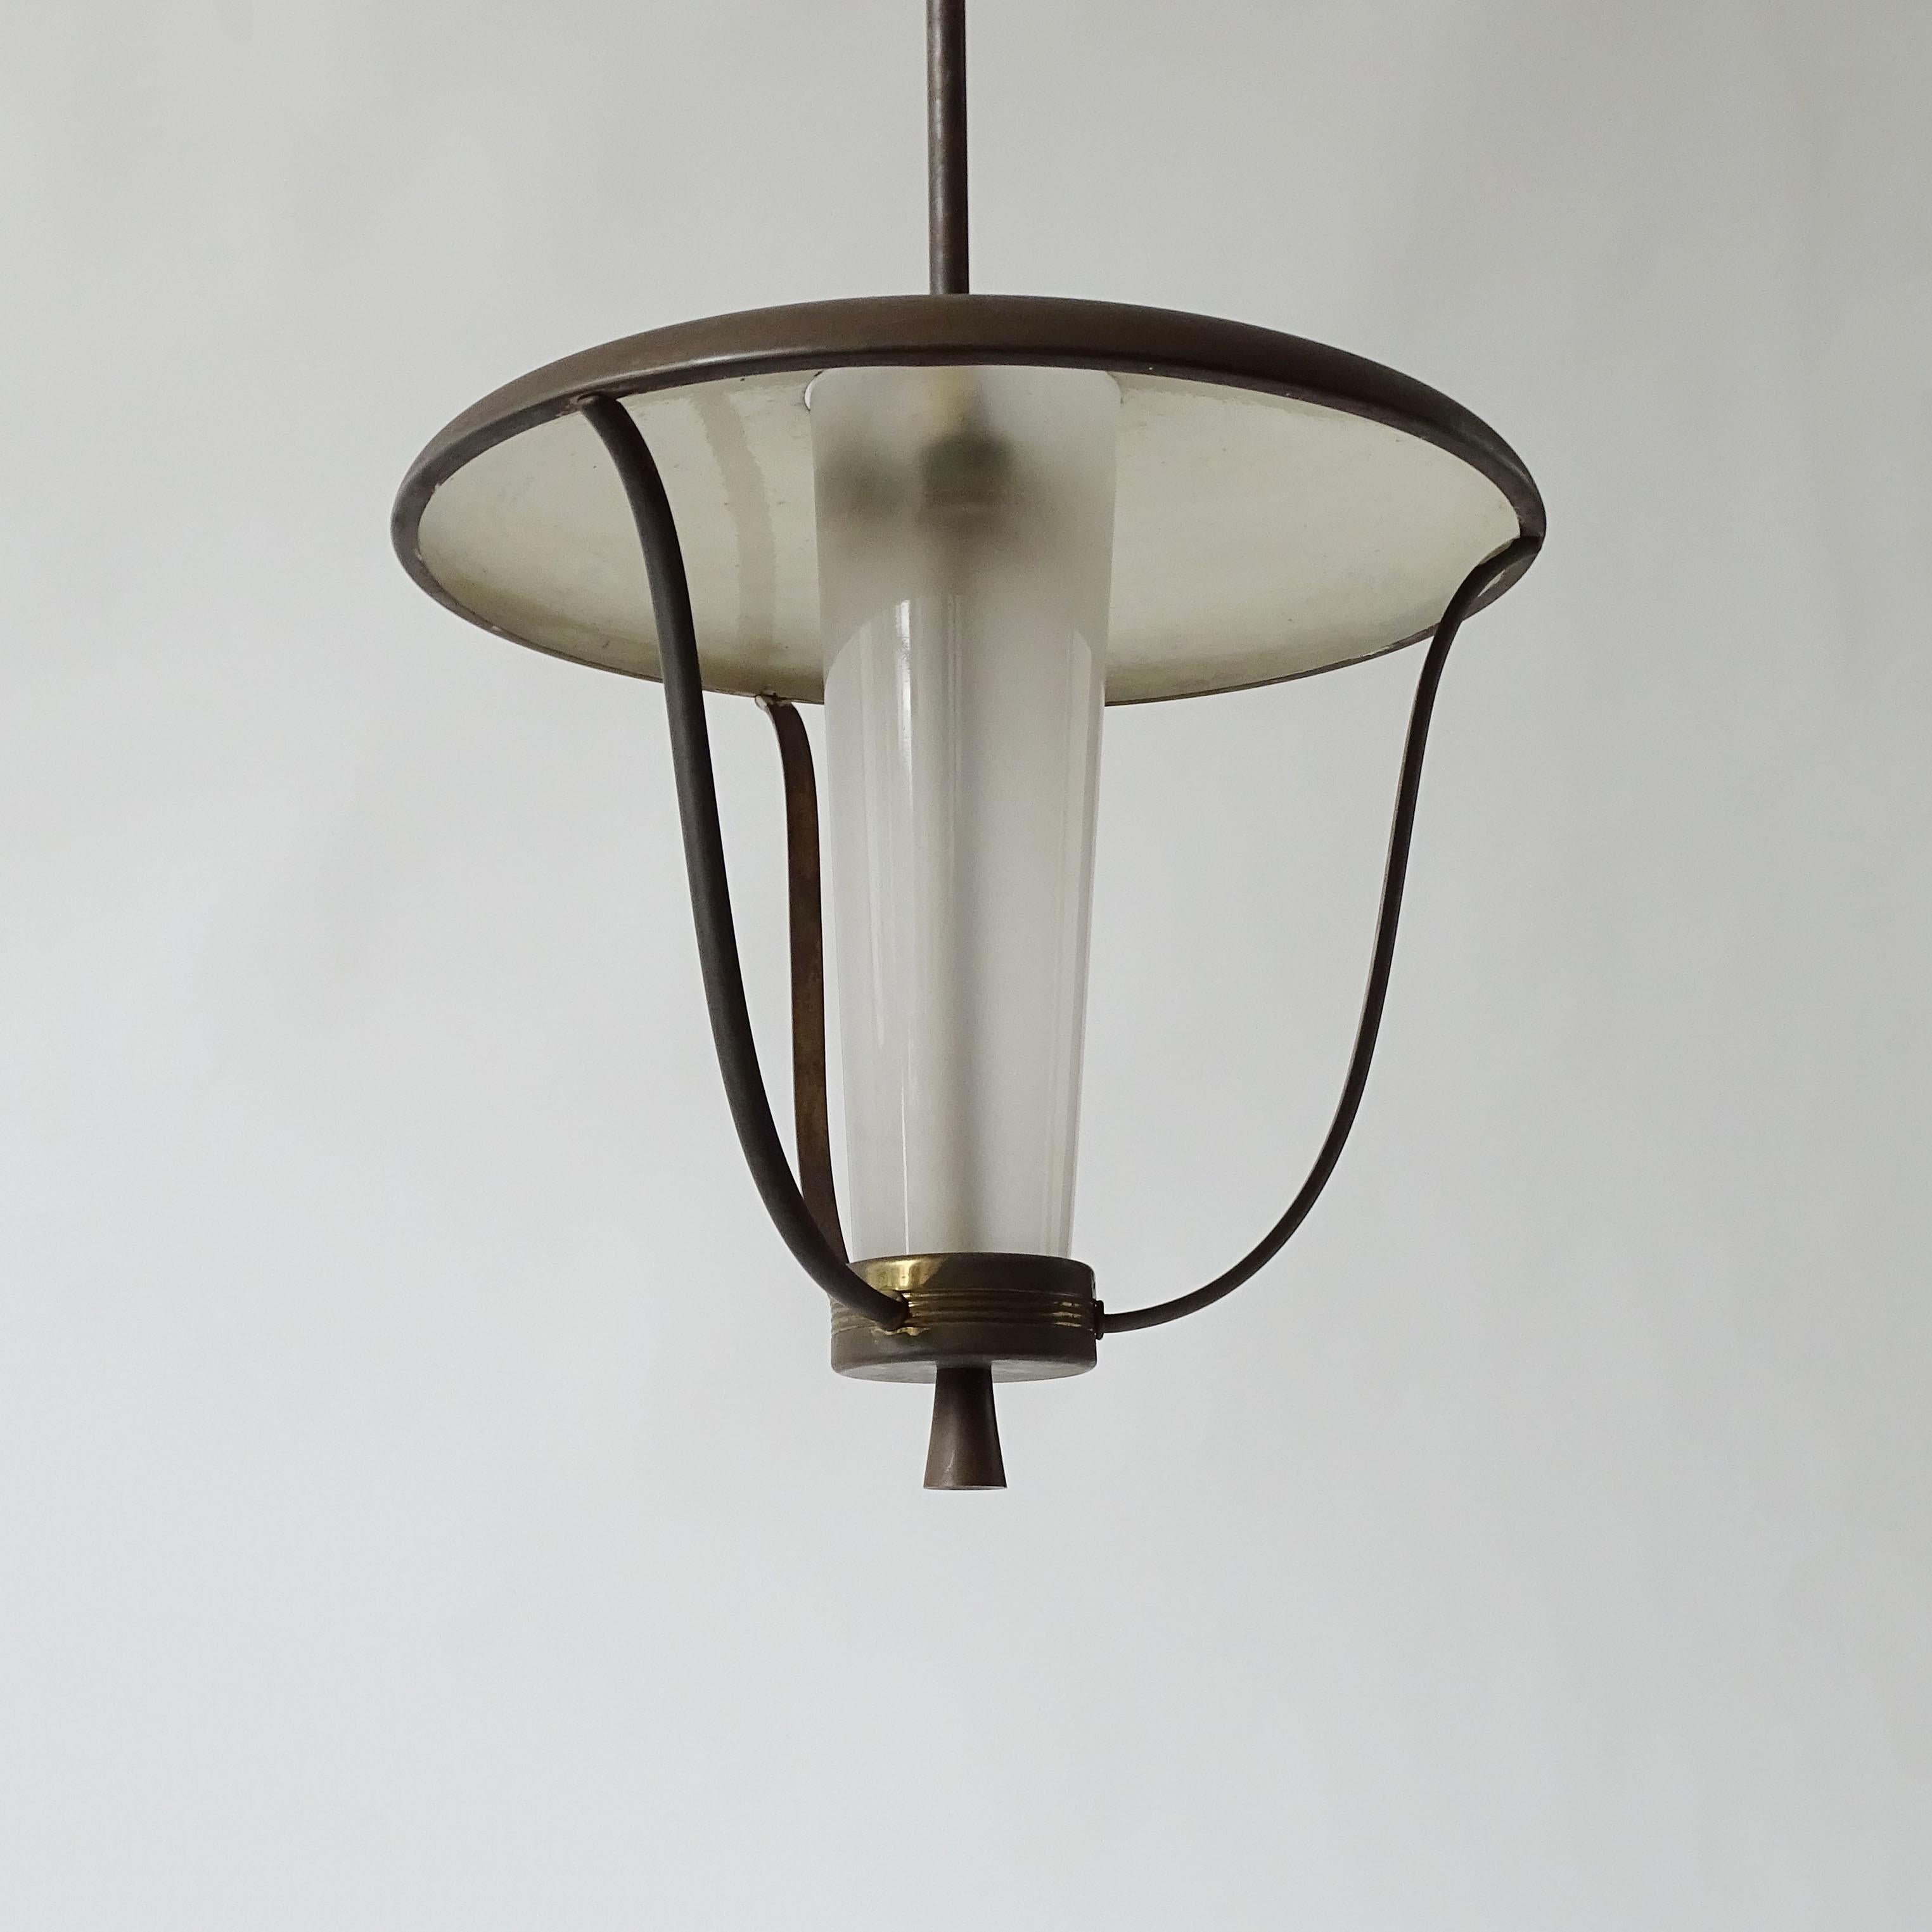 Monumental Guglielmo Ulrich Ceiling Lamp in Brass and Glass, Italy 1940s For Sale 1